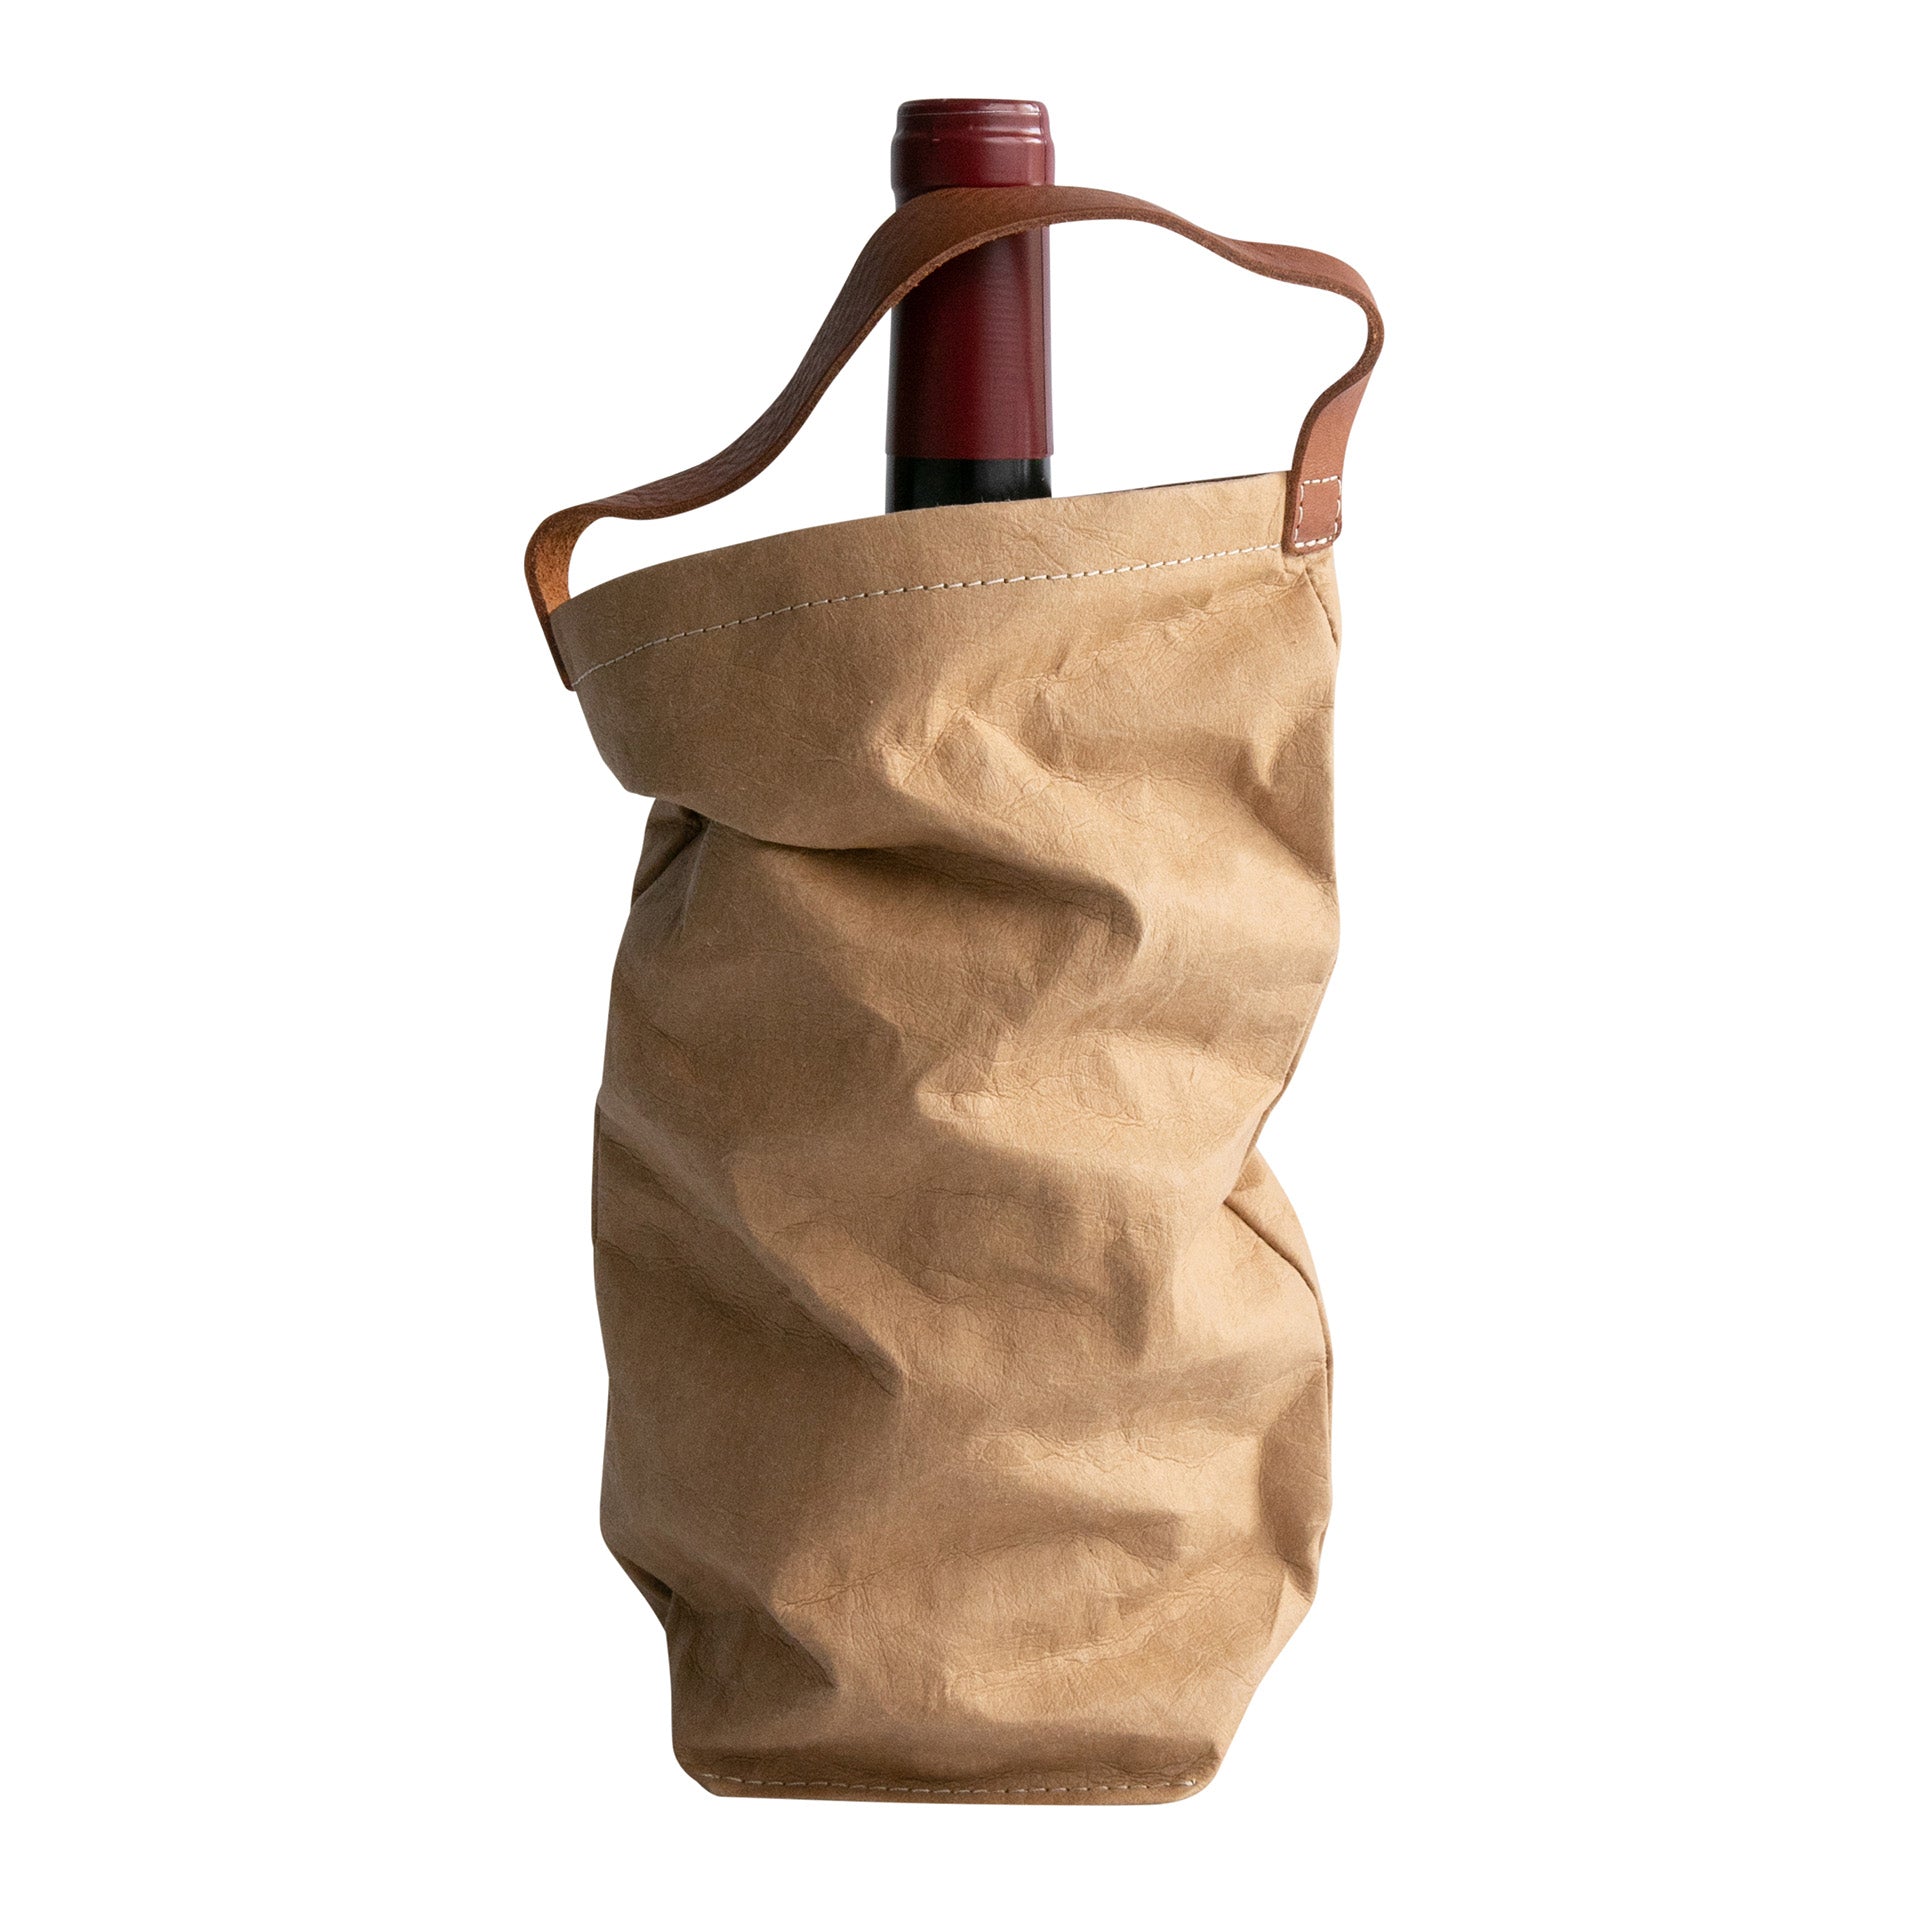 A red wine bottle is shown inside a washable paper wine bag. The bag has a small brown leather handle at the top for carrying. The washable paper wine bag shown is light tan.